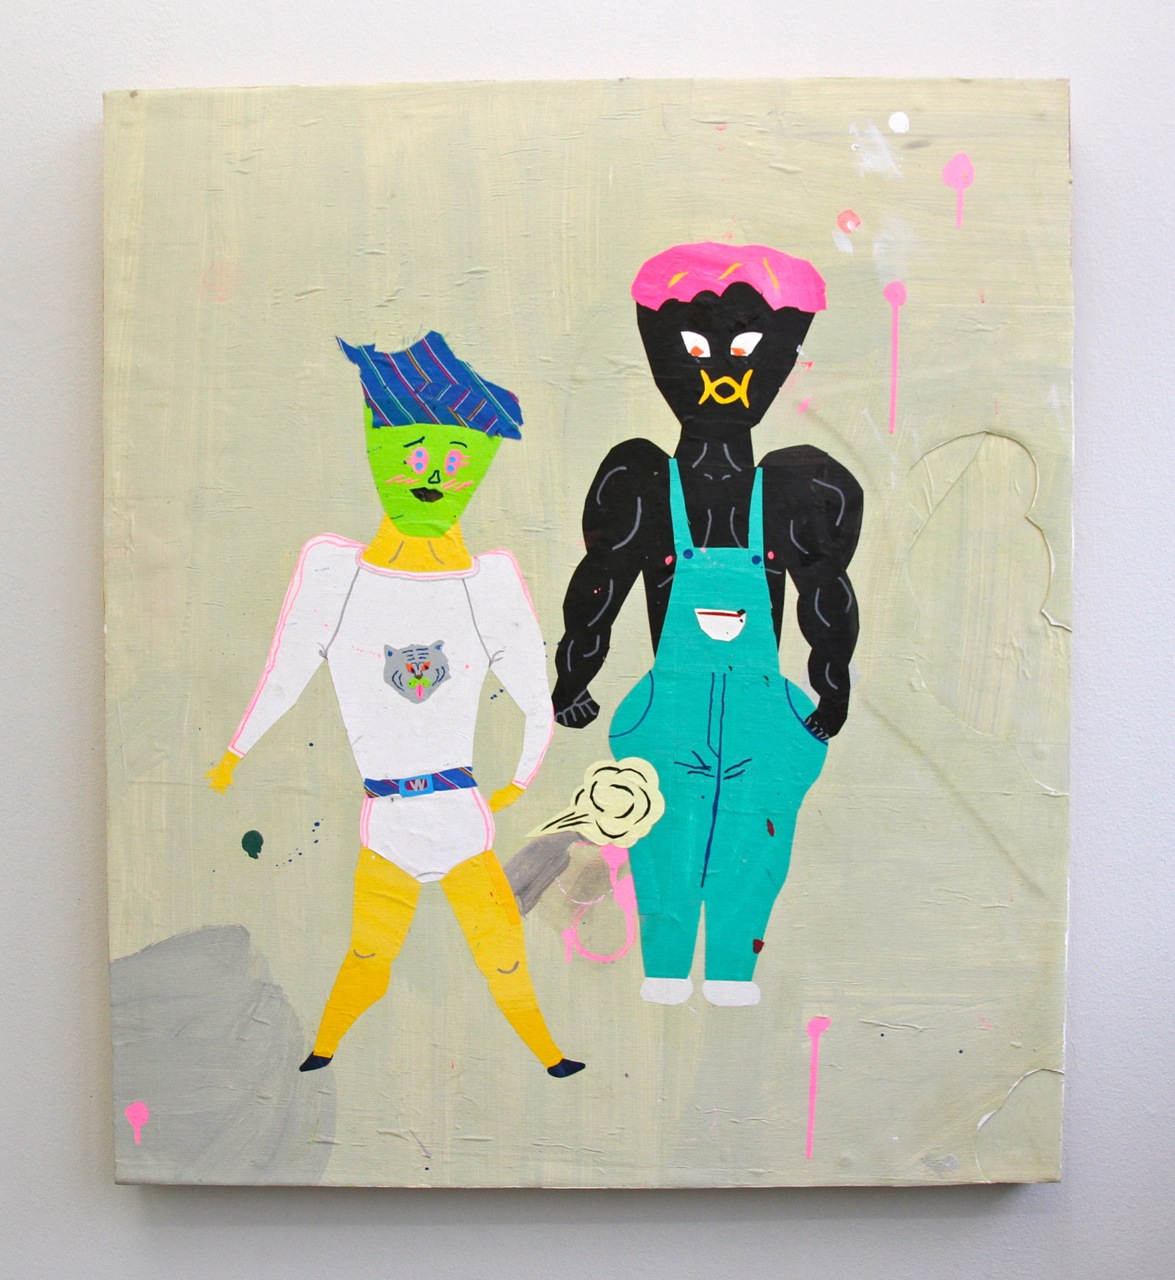 Showing: “The Art Of The Joke” @ V1 Gallery « Arrested Motion1175 x 1280